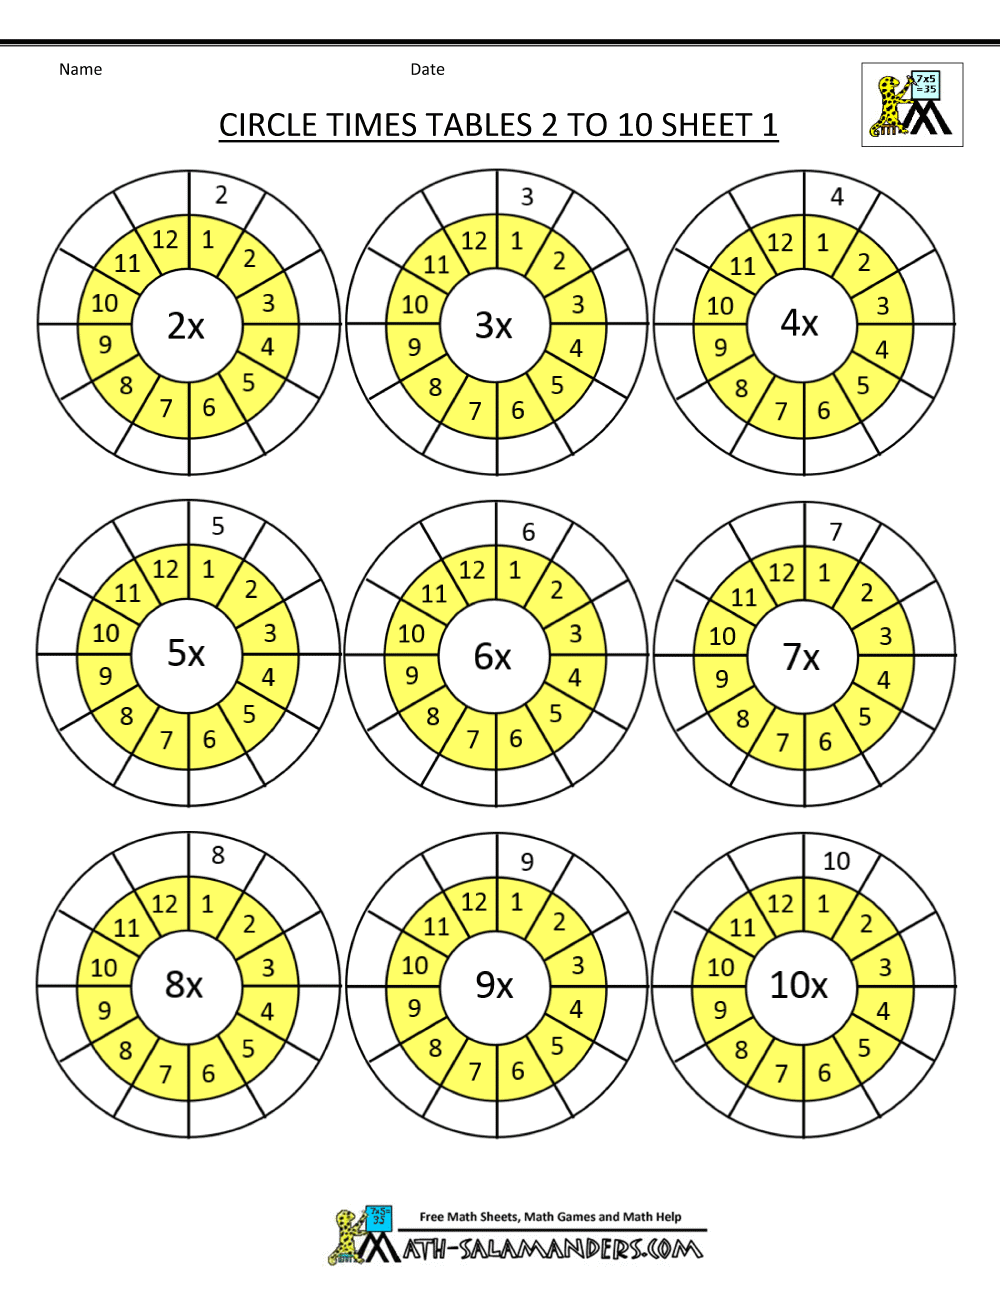 Times Table Worksheet Circles 1 to 12 Times Tables